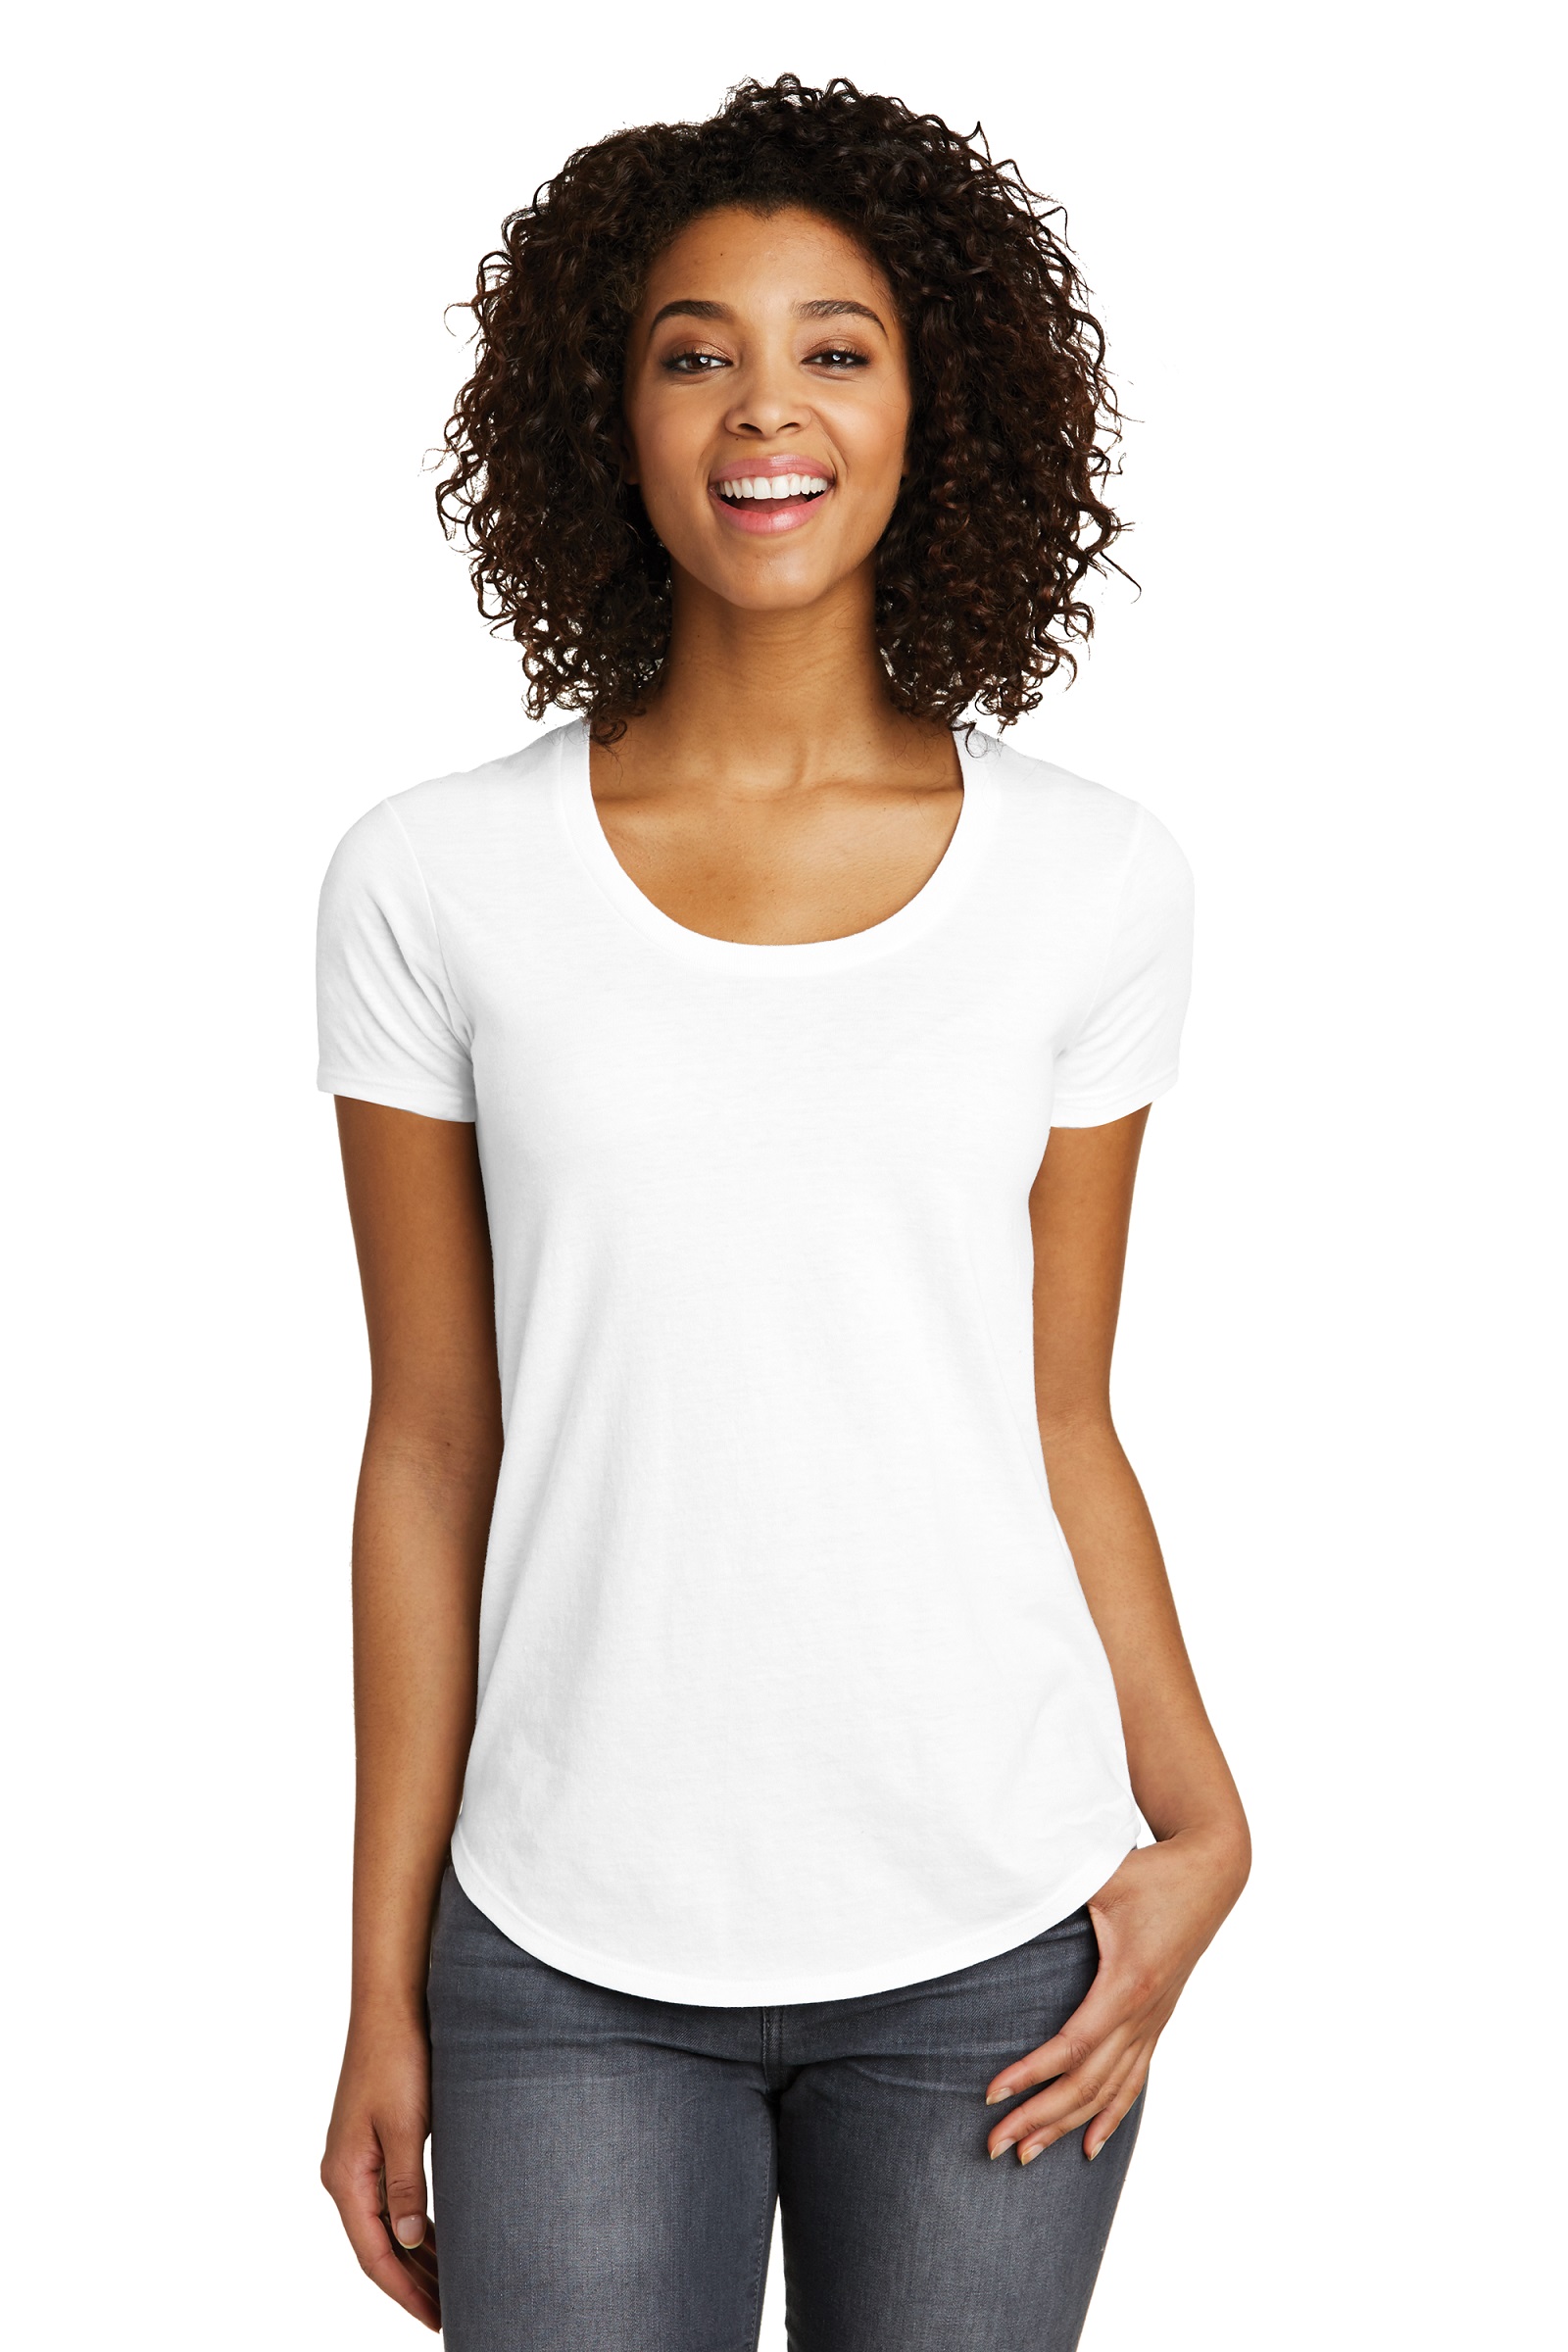 District Embroidered Women's Scoop Neck Very Important Tee